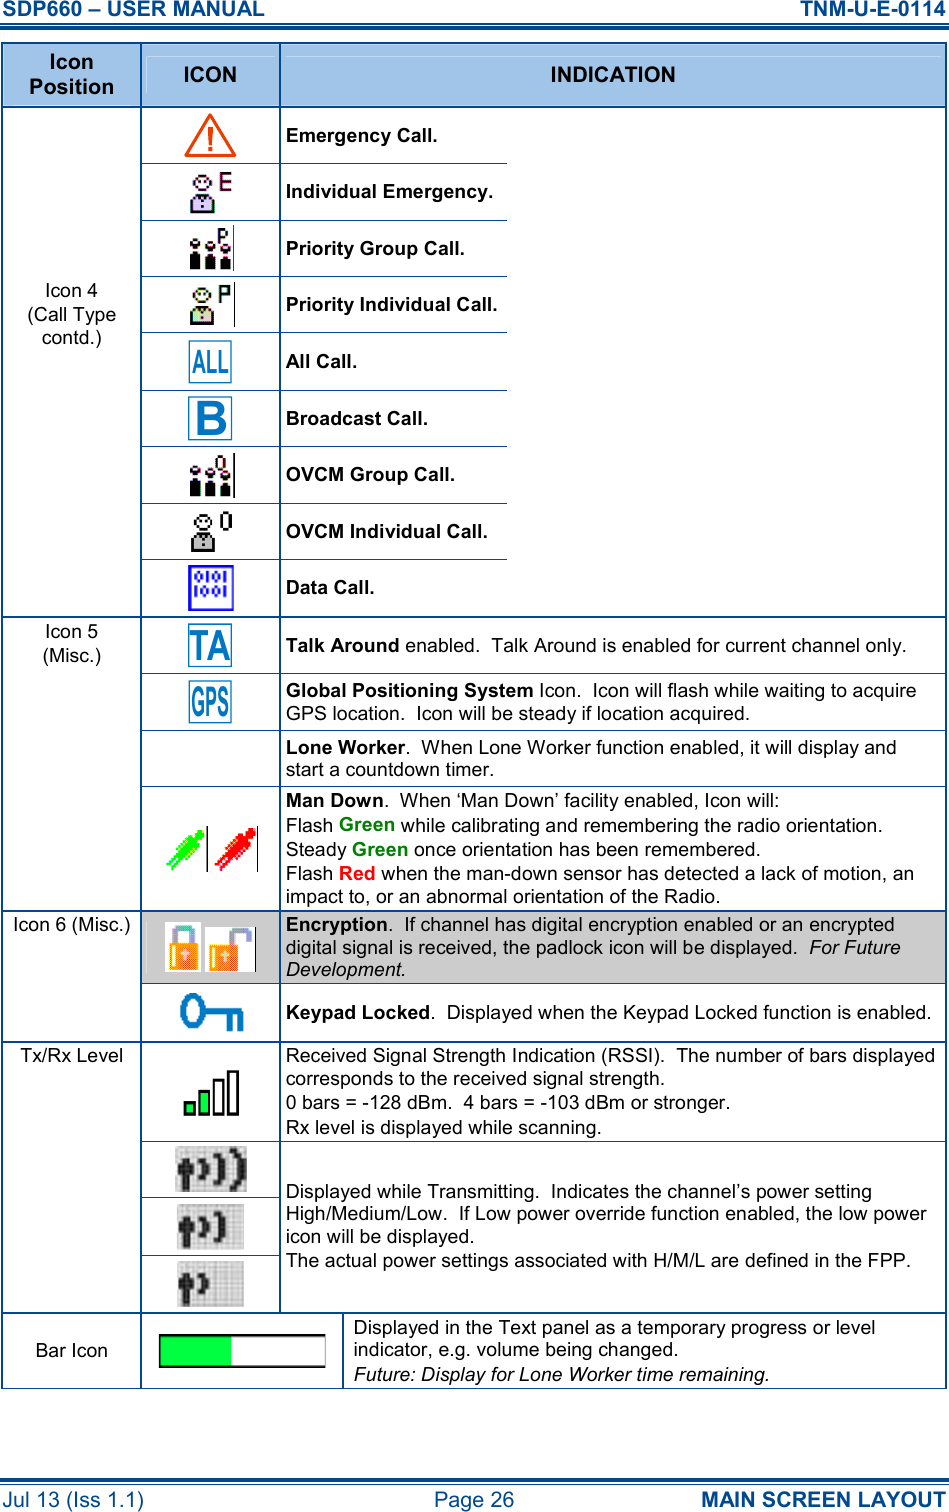 SDP660 – USER MANUAL  TNM-U-E-0114 Jul 13 (Iss 1.1)  Page 26  MAIN SCREEN LAYOUT Icon Position  ICON  INDICATION   Emergency Call.     Individual Emergency.     Priority Group Call.    Priority Individual Call.  Icon 4 (Call Type contd.) ALL All Call.    B Broadcast Call.     OVCM Group Call.     OVCM Individual Call.     Data Call.   Icon 5 (Misc.) TA Talk Around enabled.  Talk Around is enabled for current channel only.  GPS Global Positioning System Icon.  Icon will flash while waiting to acquire GPS location.  Icon will be steady if location acquired.   Lone Worker.  When Lone Worker function enabled, it will display and start a countdown timer.     Man Down.  When ‘Man Down’ facility enabled, Icon will: Flash Green while calibrating and remembering the radio orientation. Steady Green once orientation has been remembered. Flash Red when the man-down sensor has detected a lack of motion, an impact to, or an abnormal orientation of the Radio.    Encryption.  If channel has digital encryption enabled or an encrypted digital signal is received, the padlock icon will be displayed.  For Future Development. Icon 6 (Misc.)  Keypad Locked.  Displayed when the Keypad Locked function is enabled. Tx/Rx Level  Received Signal Strength Indication (RSSI).  The number of bars displayed corresponds to the received signal strength. 0 bars = -128 dBm.  4 bars = -103 dBm or stronger. Rx level is displayed while scanning.       Displayed while Transmitting.  Indicates the channel’s power setting High/Medium/Low.  If Low power override function enabled, the low power icon will be displayed. The actual power settings associated with H/M/L are defined in the FPP. Bar Icon   Displayed in the Text panel as a temporary progress or level indicator, e.g. volume being changed. Future: Display for Lone Worker time remaining.  